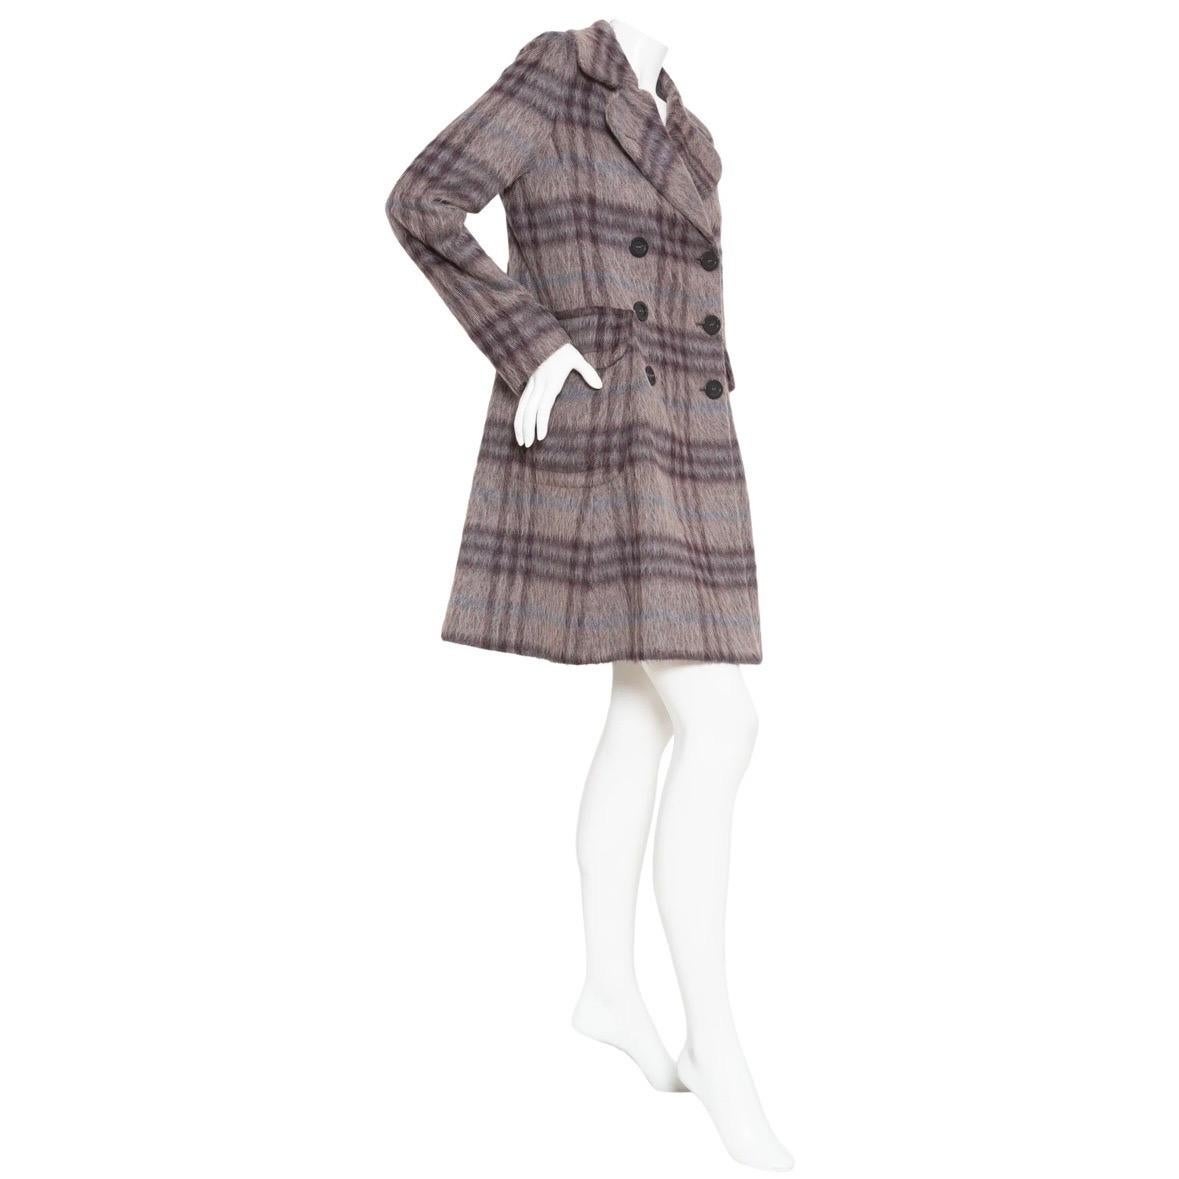 Burberry Plaid Print Trench Coat

Purple/Gray/Blue/Beige
A-line silhouette
Notched collar
Flap pockets
Front button closure
Textured plaid print
60% wool, 27% alpaca, 13% polyamide; 100% cupro lining
Made in Italy
Great pre-owned condition; minimal